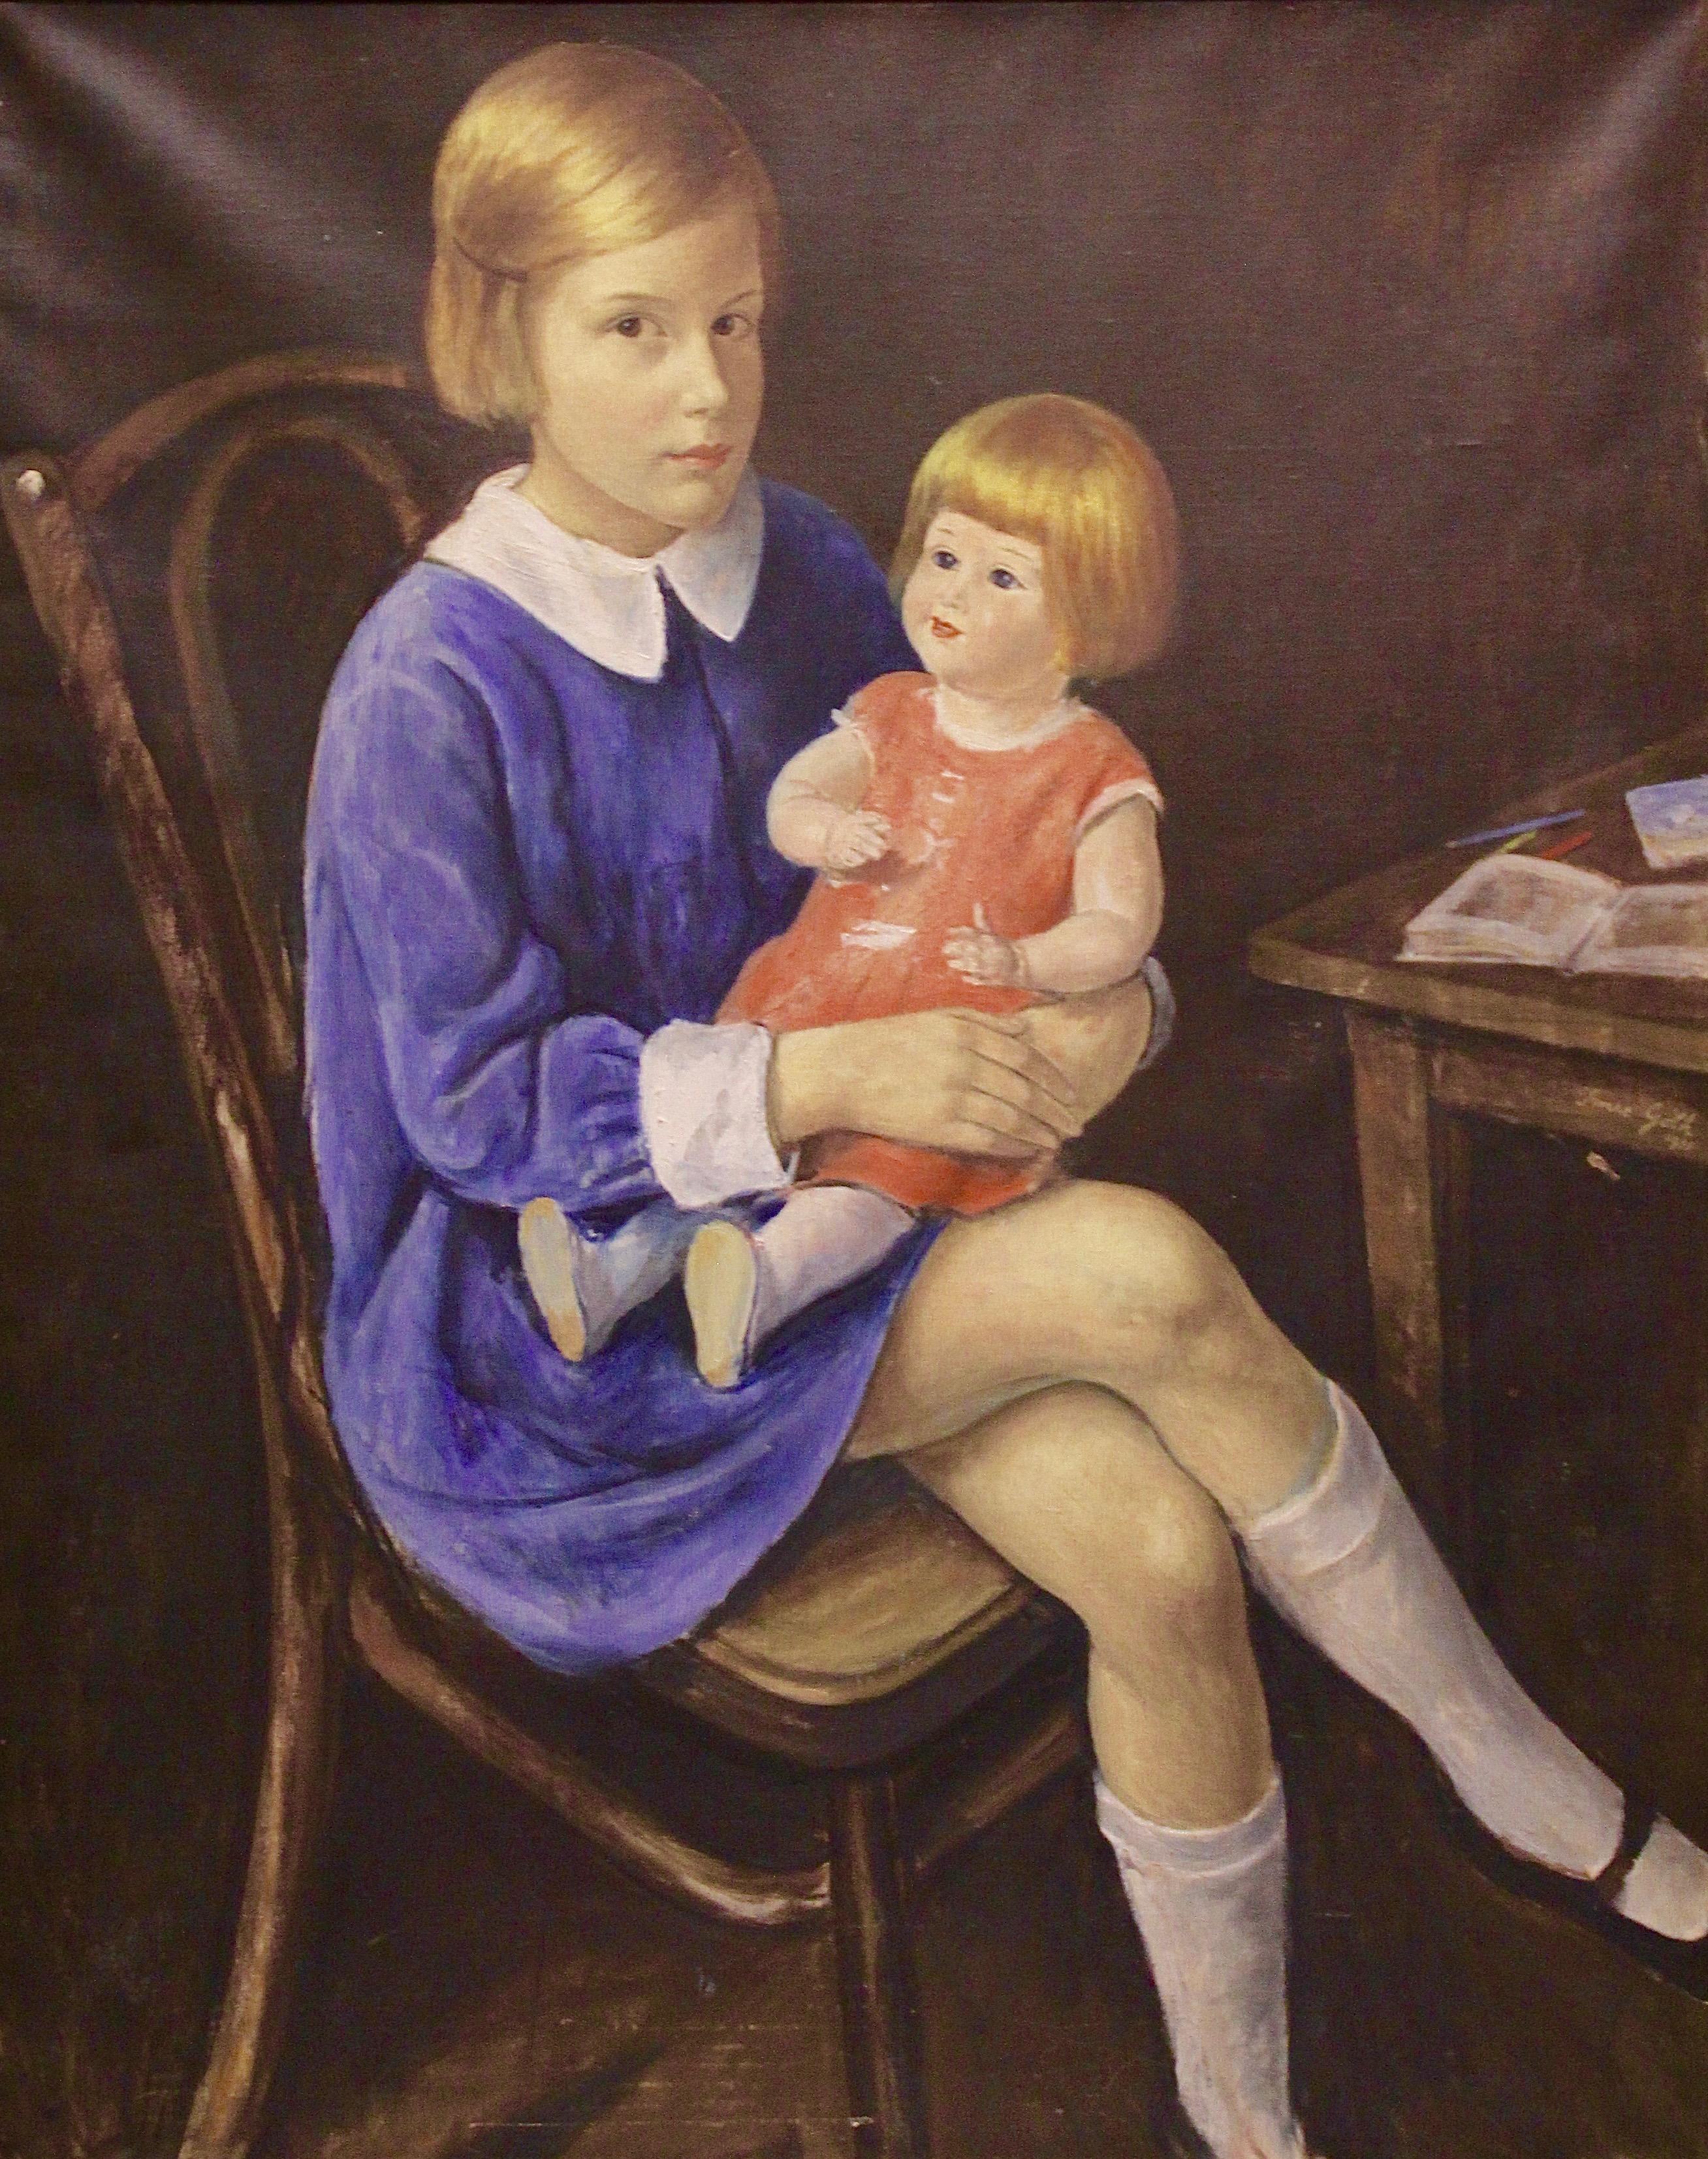 Imre Goth, 1893-1982, Hungary, "Little lady with doll" Oil on canvas circa 1931